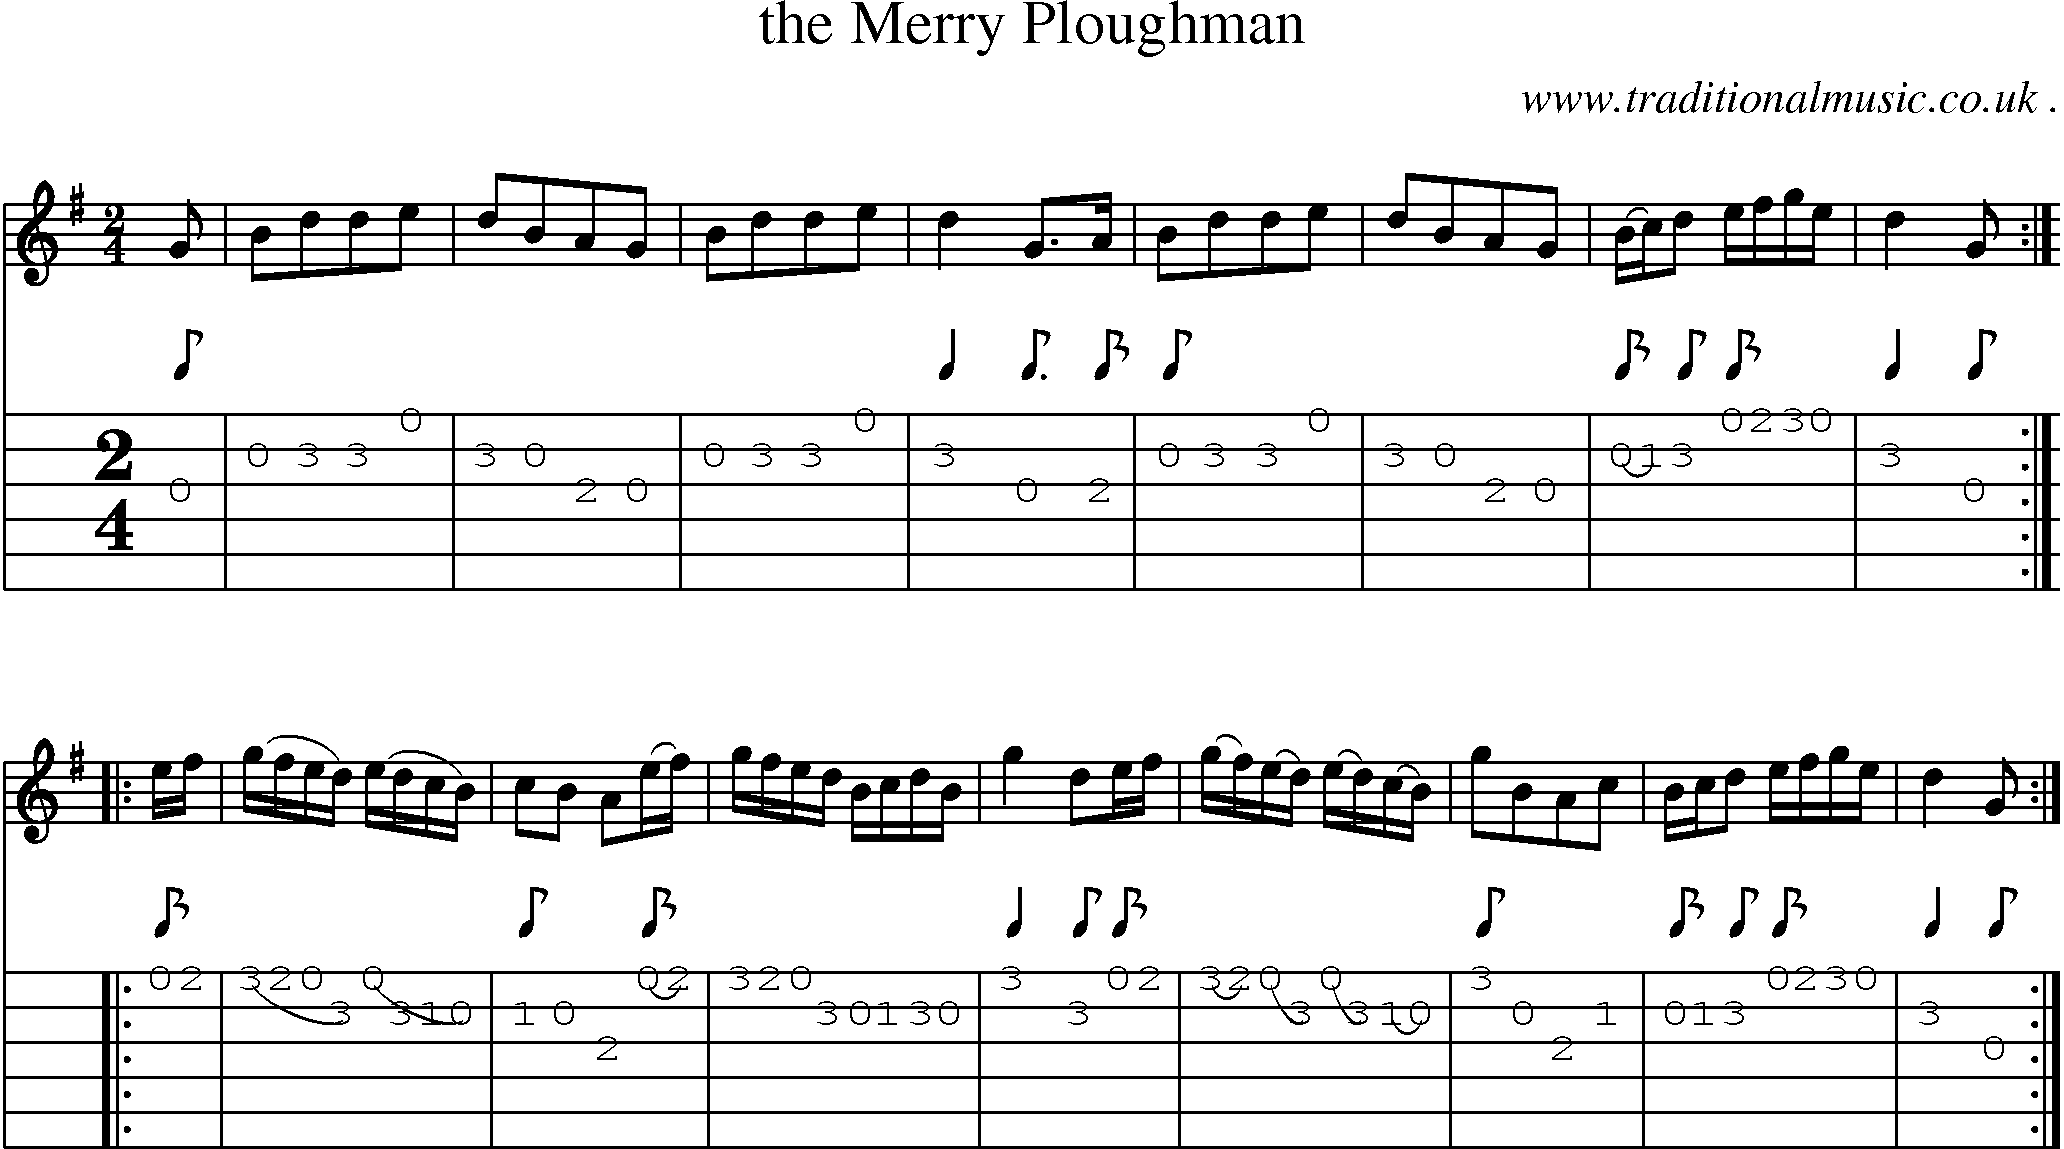 Sheet-Music and Guitar Tabs for The Merry Ploughman